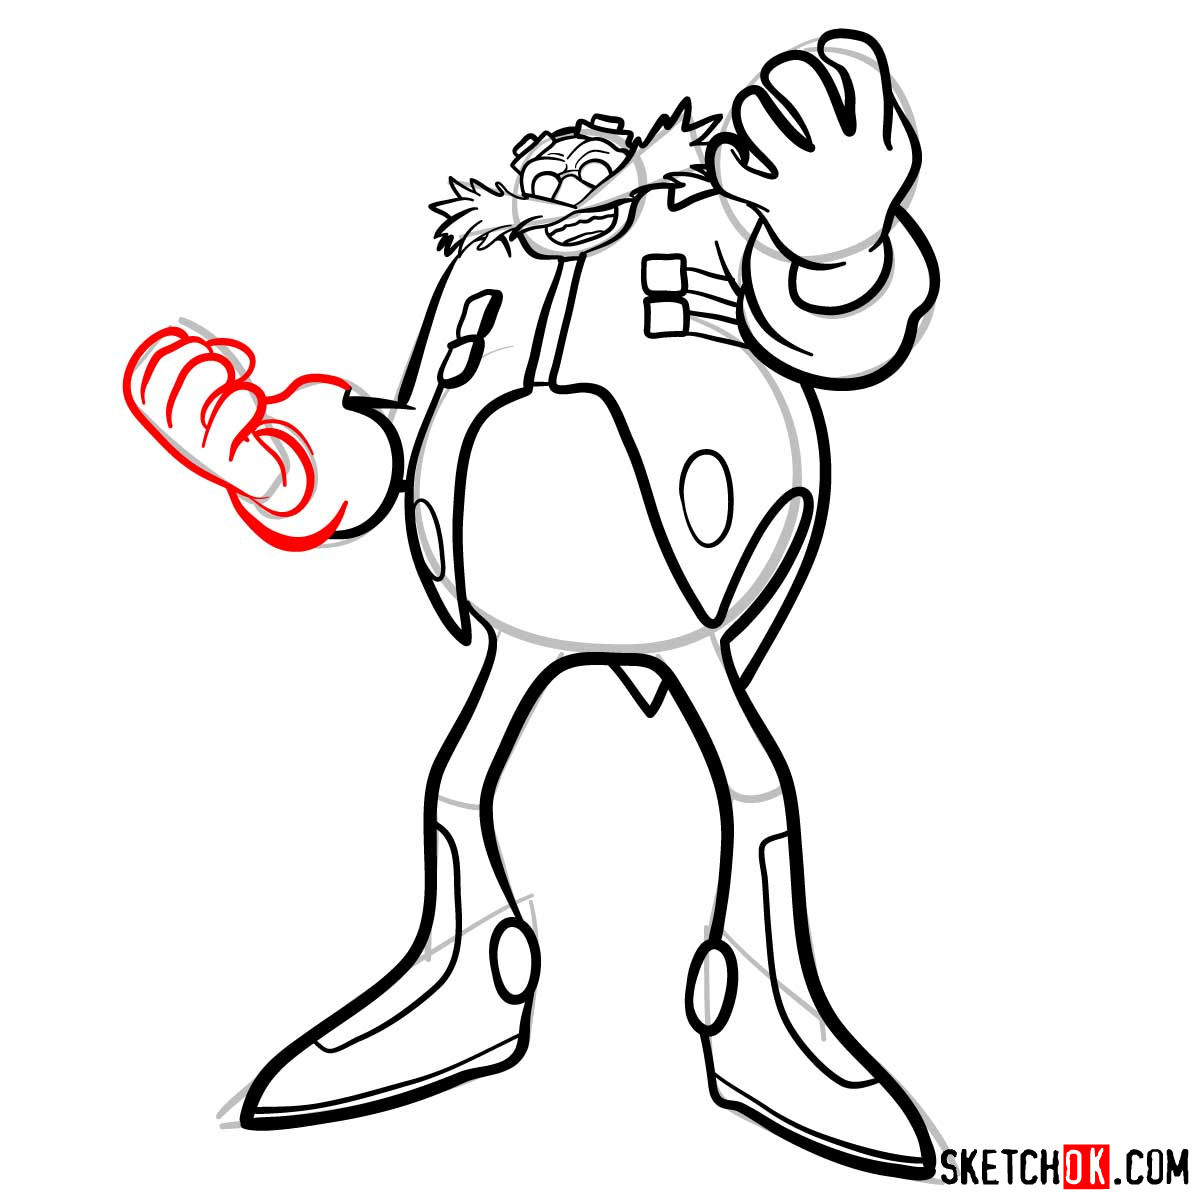 How to draw Dr. Robotnik (Eggman) from Sonic the Hedgehog - step 14